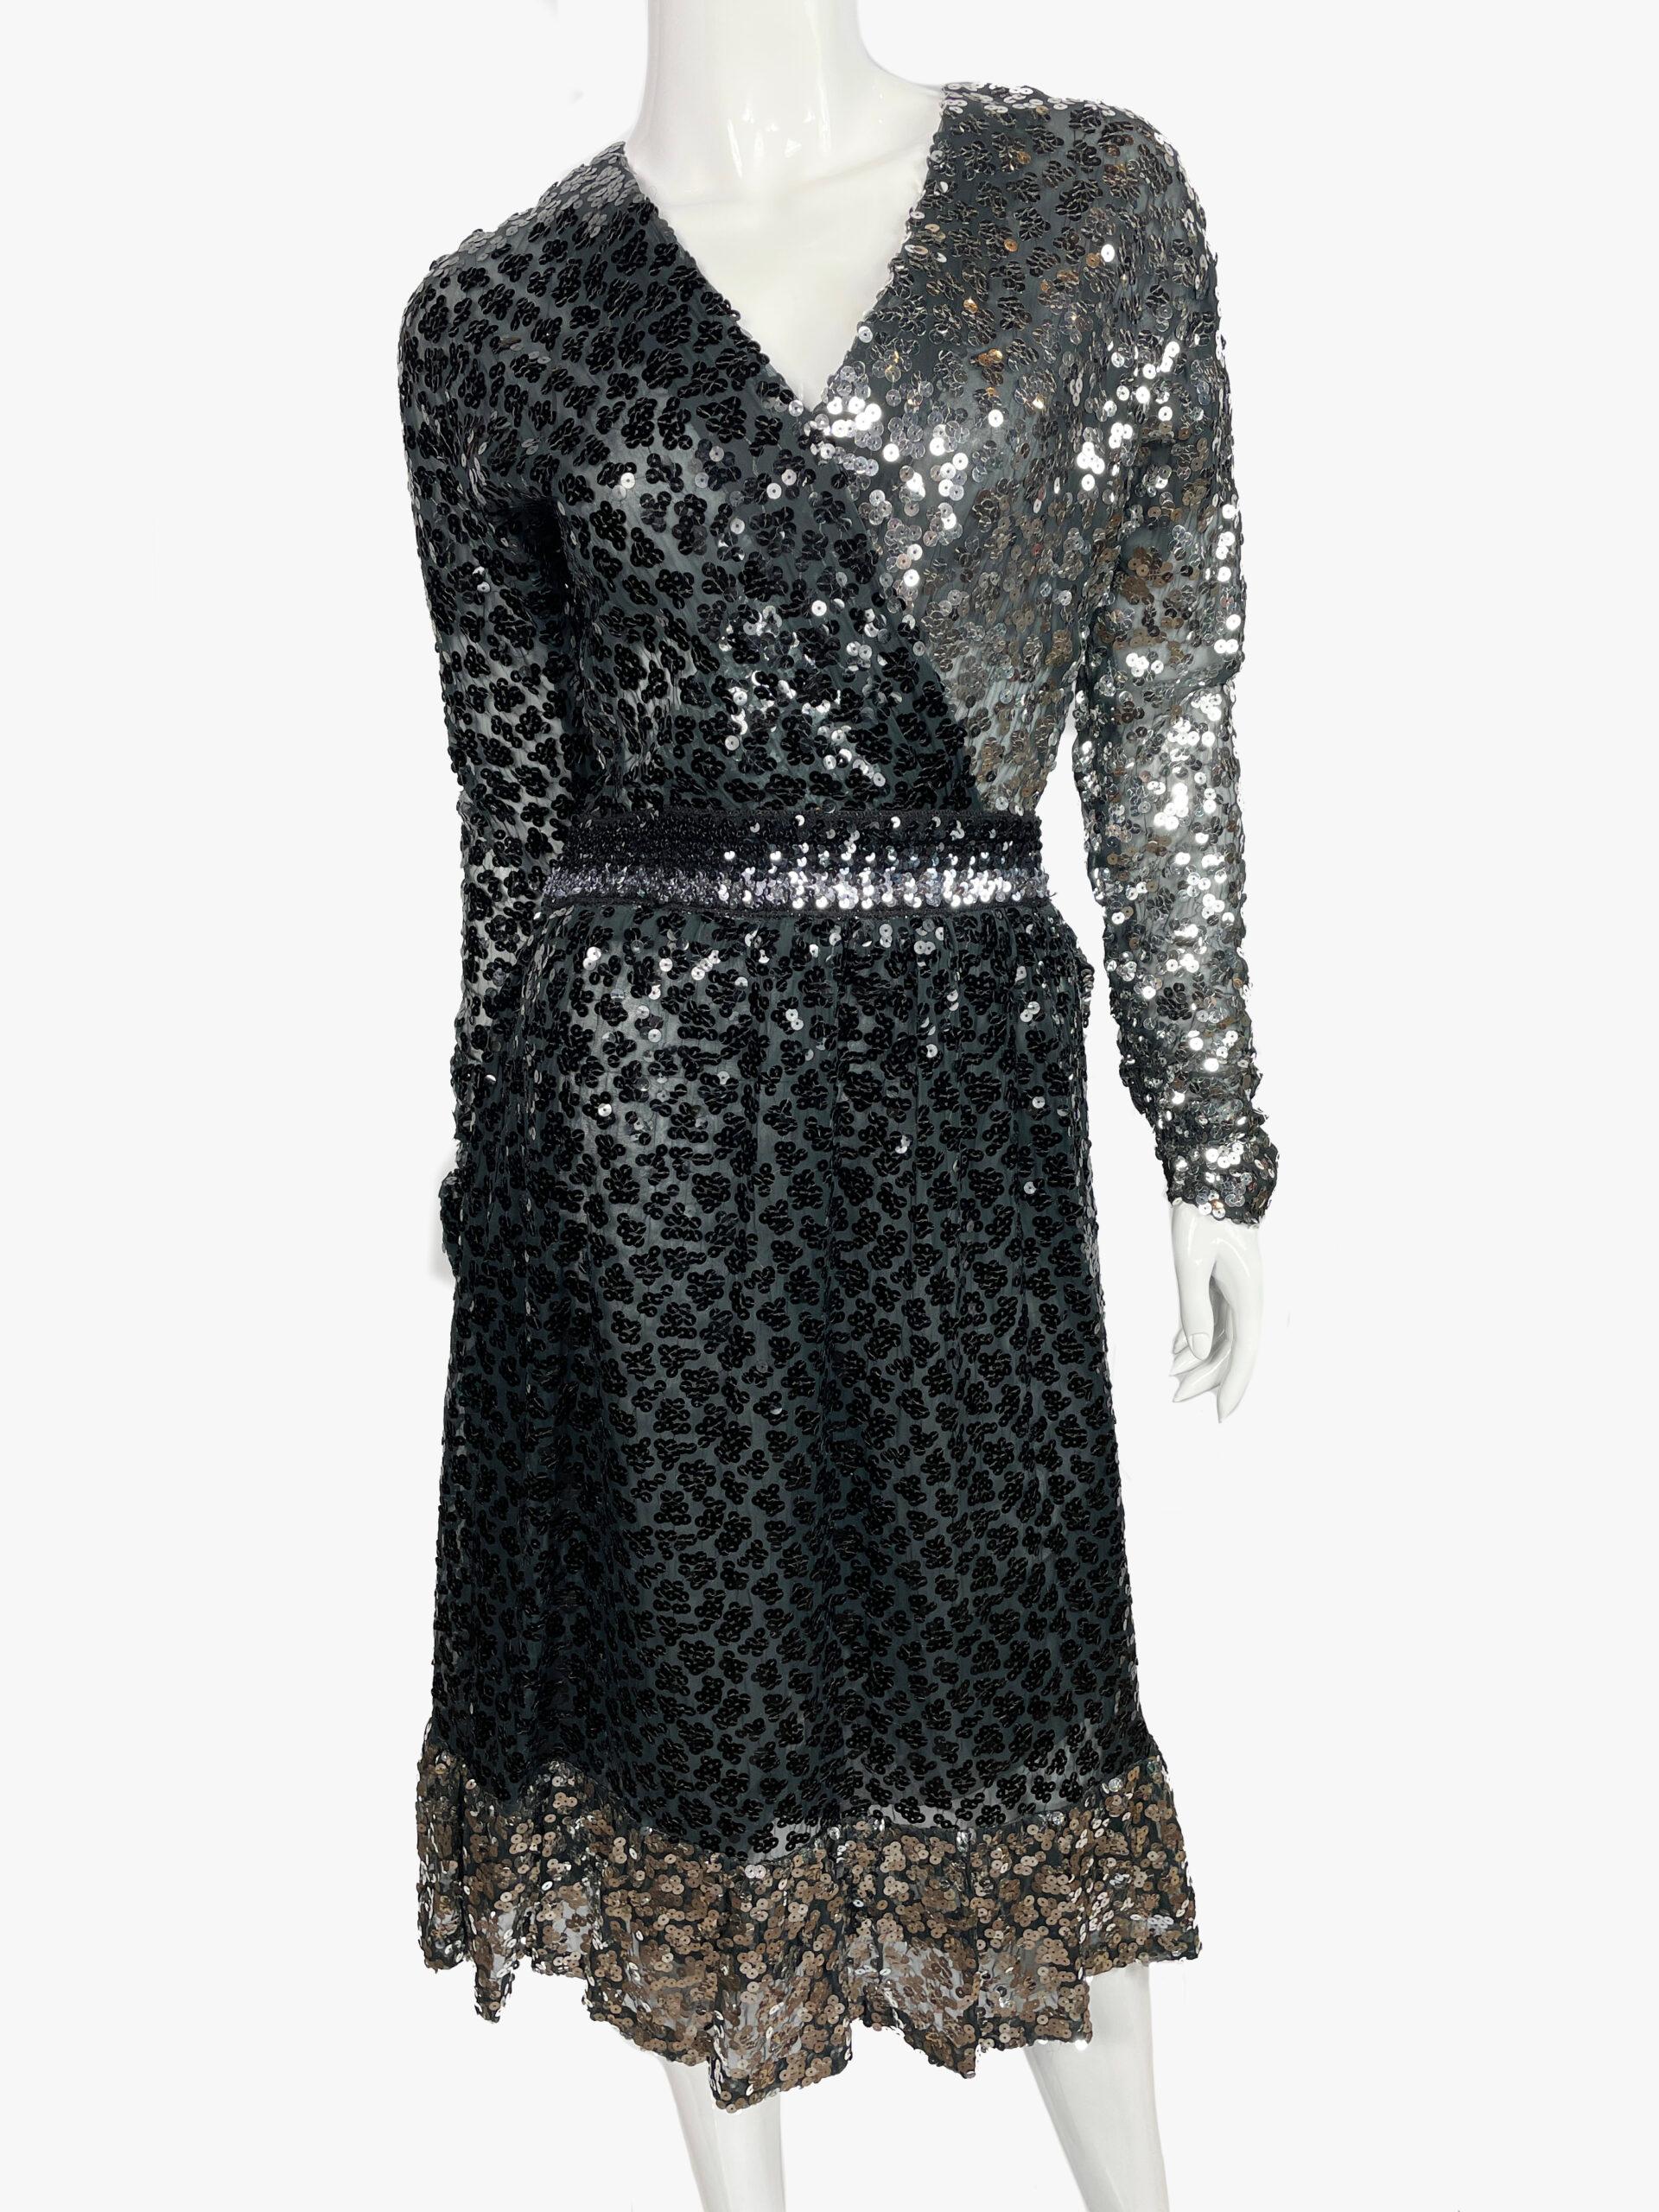 Vintage Givenchy Nouvelle Boutique demi couture A-line dress from 1980’s collection.

Sequin embellishments, long sleeve with V-neck.

Size not listed, estimated from measurements.
Hip: 34”/86.5 cm
Length: 44”/112 cm
Waist: 24”/61 cm
Bust: 32”/81